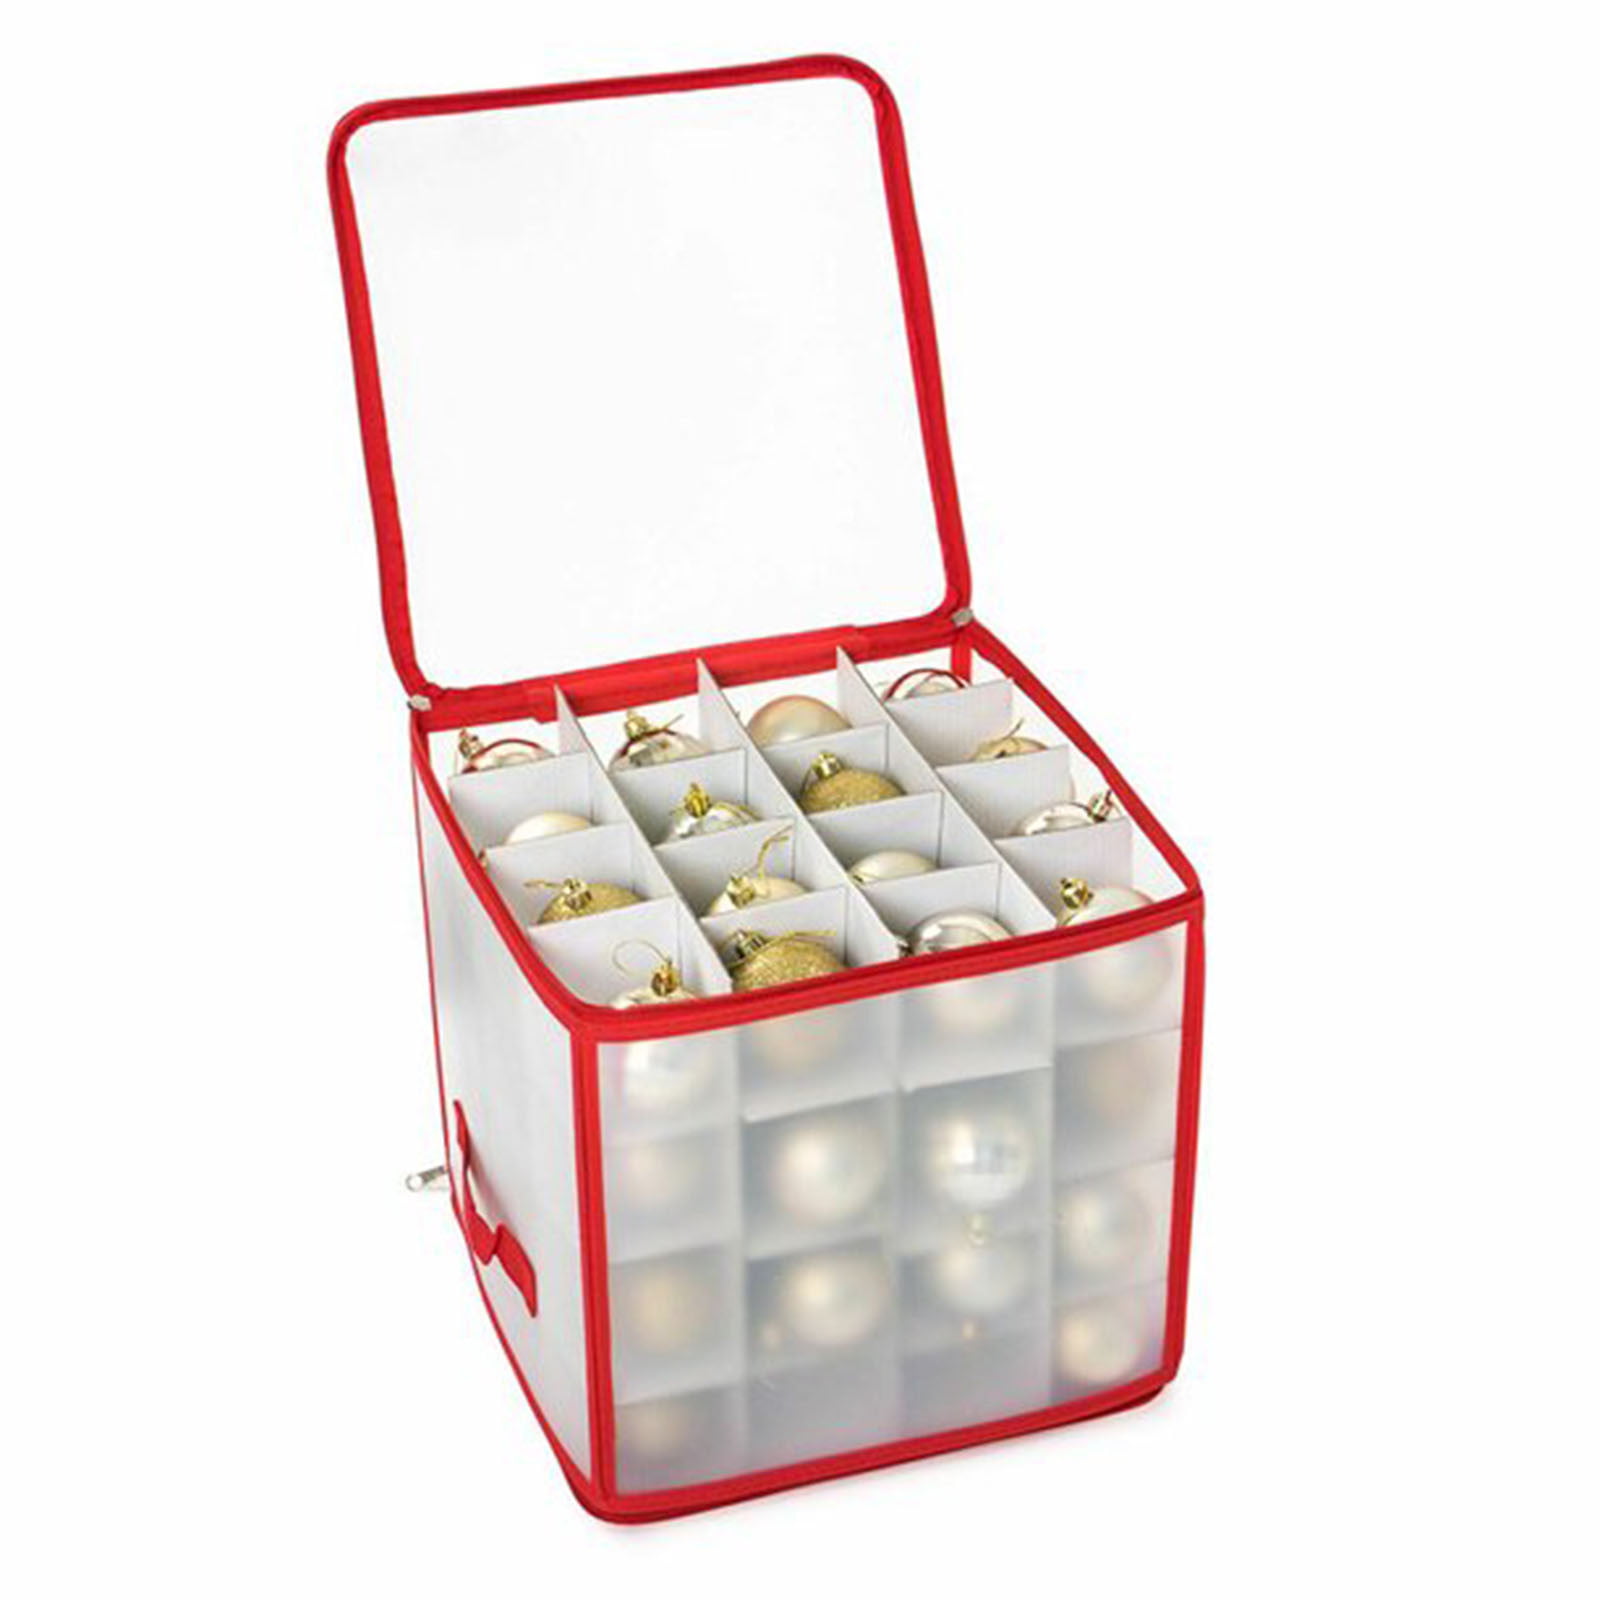  Plastic Christmas Ornament Storage Box with Zippered Closure  [1Pack], Hold 64 Christmas Balls Holiday Ornaments Holiday Ornament Storage  Cube Organizer Christmas Chest with Dividers, Xmas Holiday : Home & Kitchen